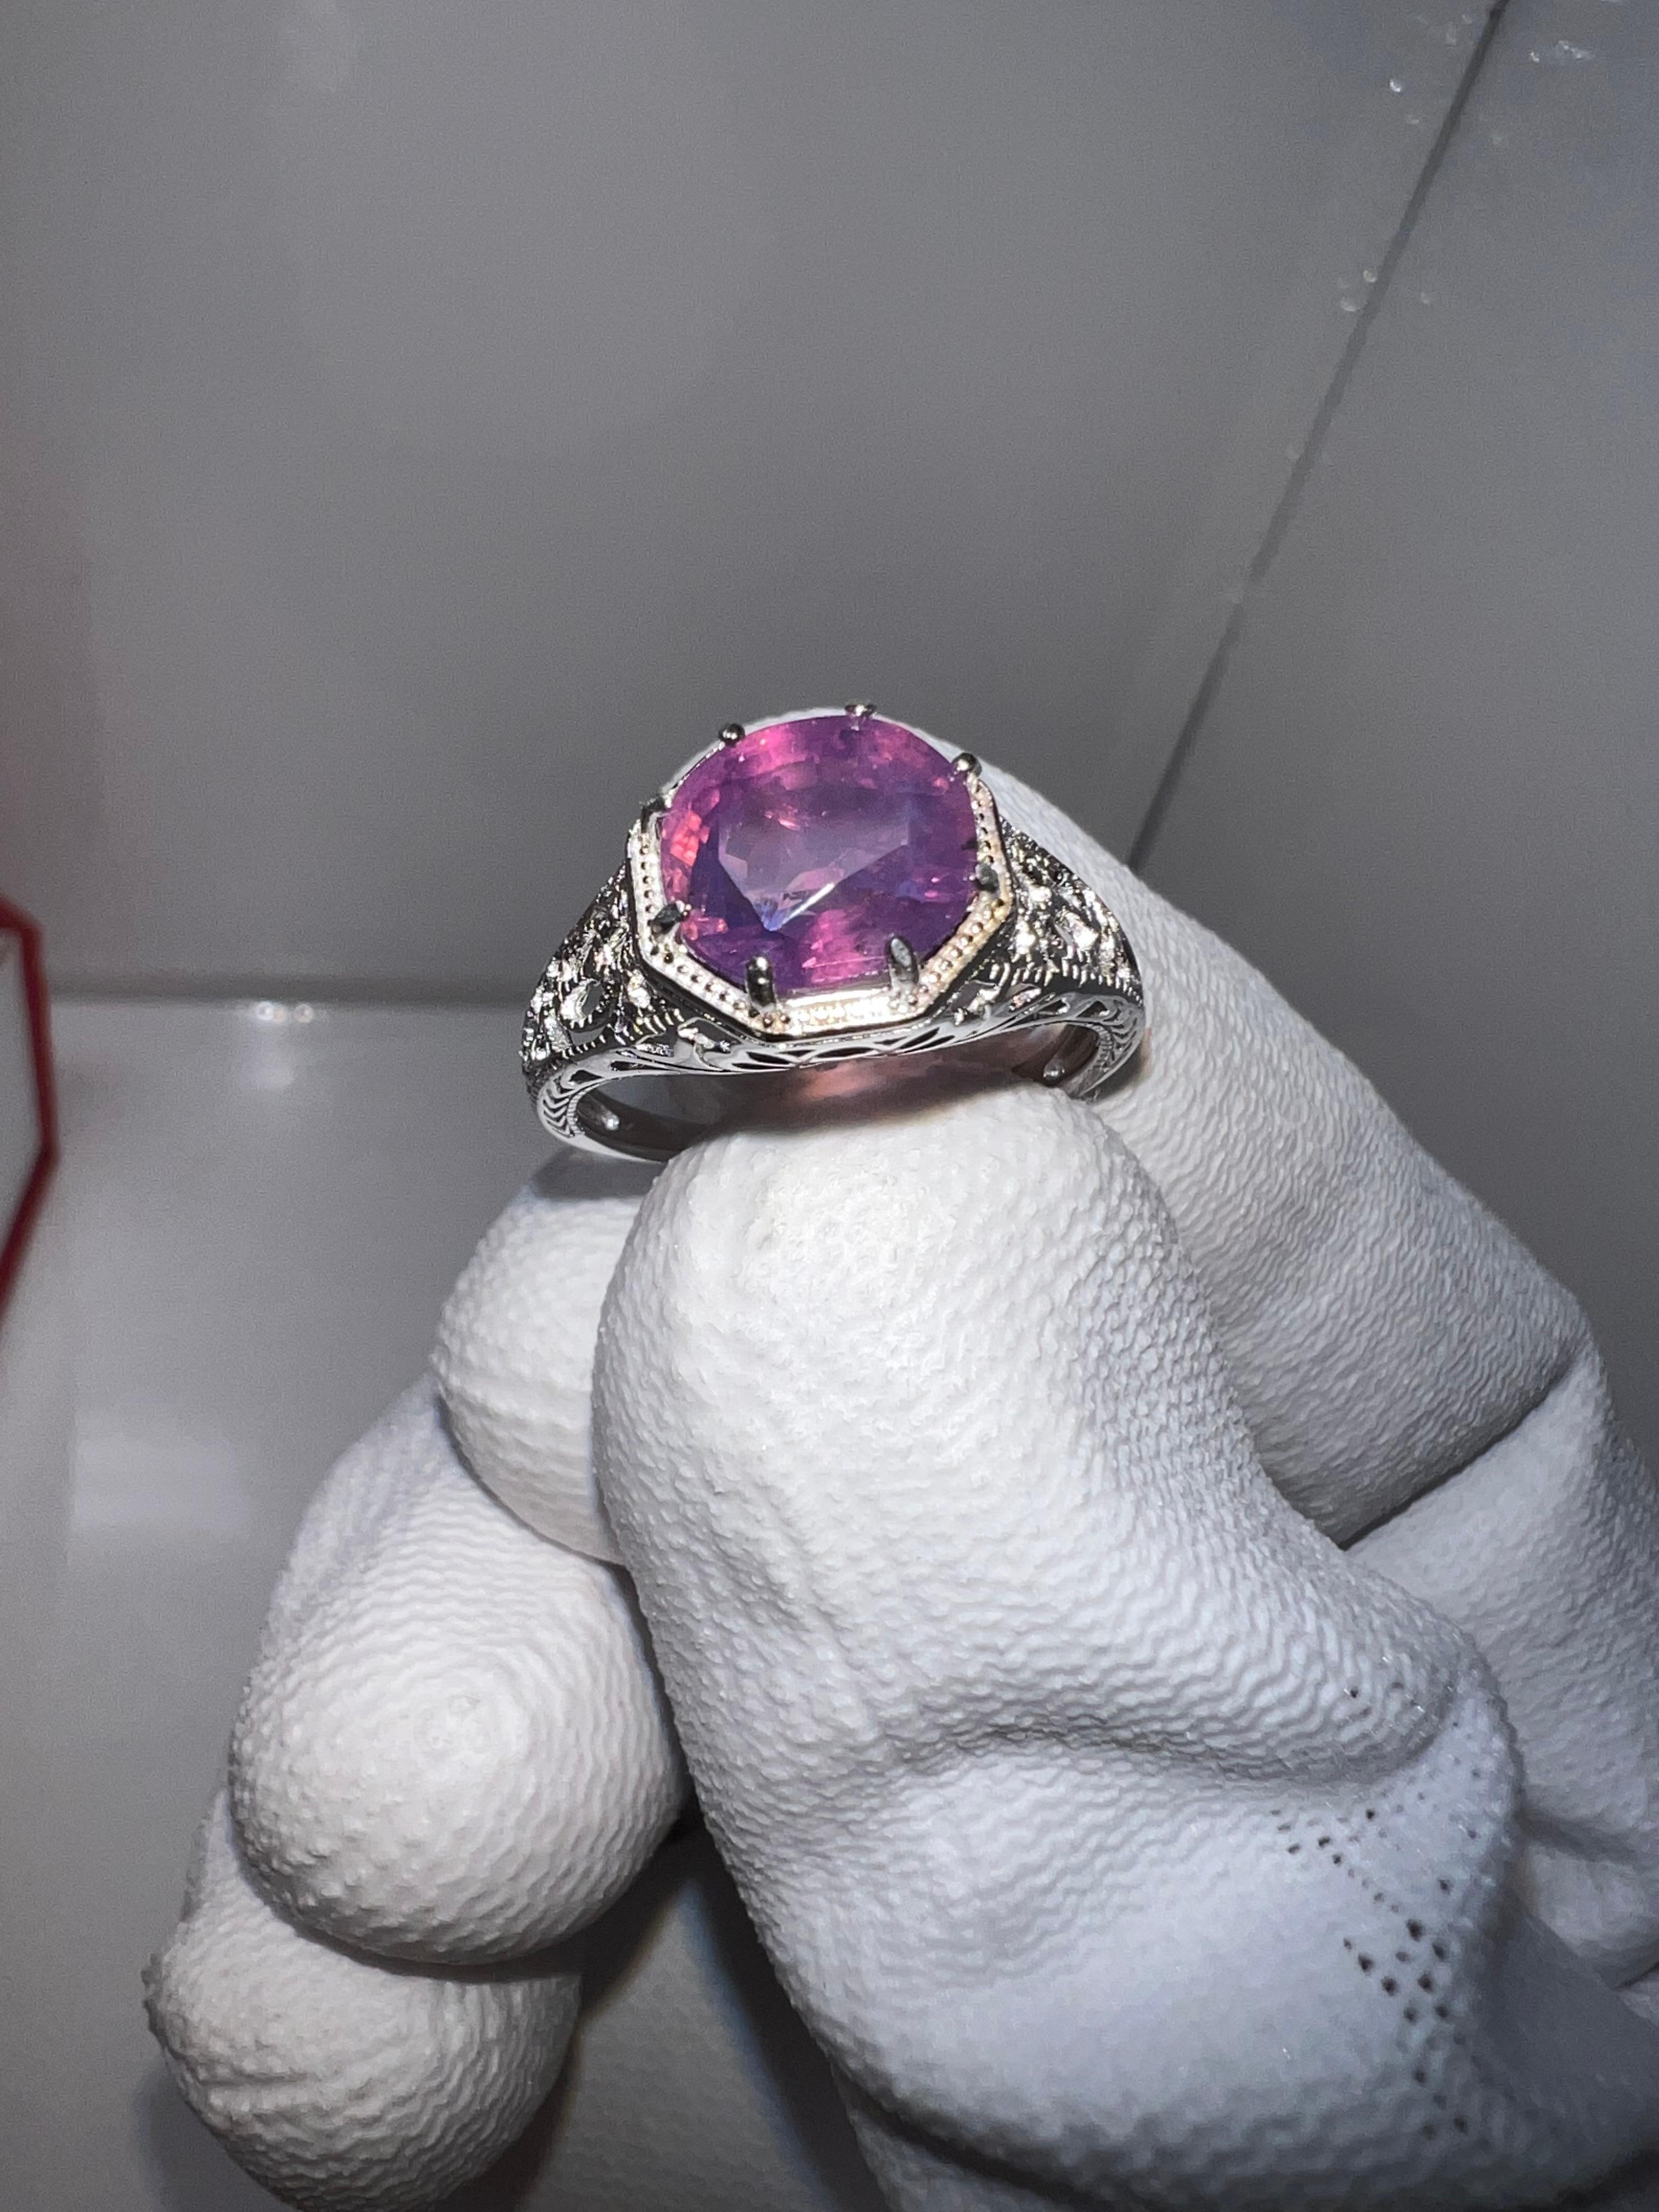 Contemporary 3.6 Carat Vivid Pink with Blue Hue Kashmir Sapphire Silver Ring